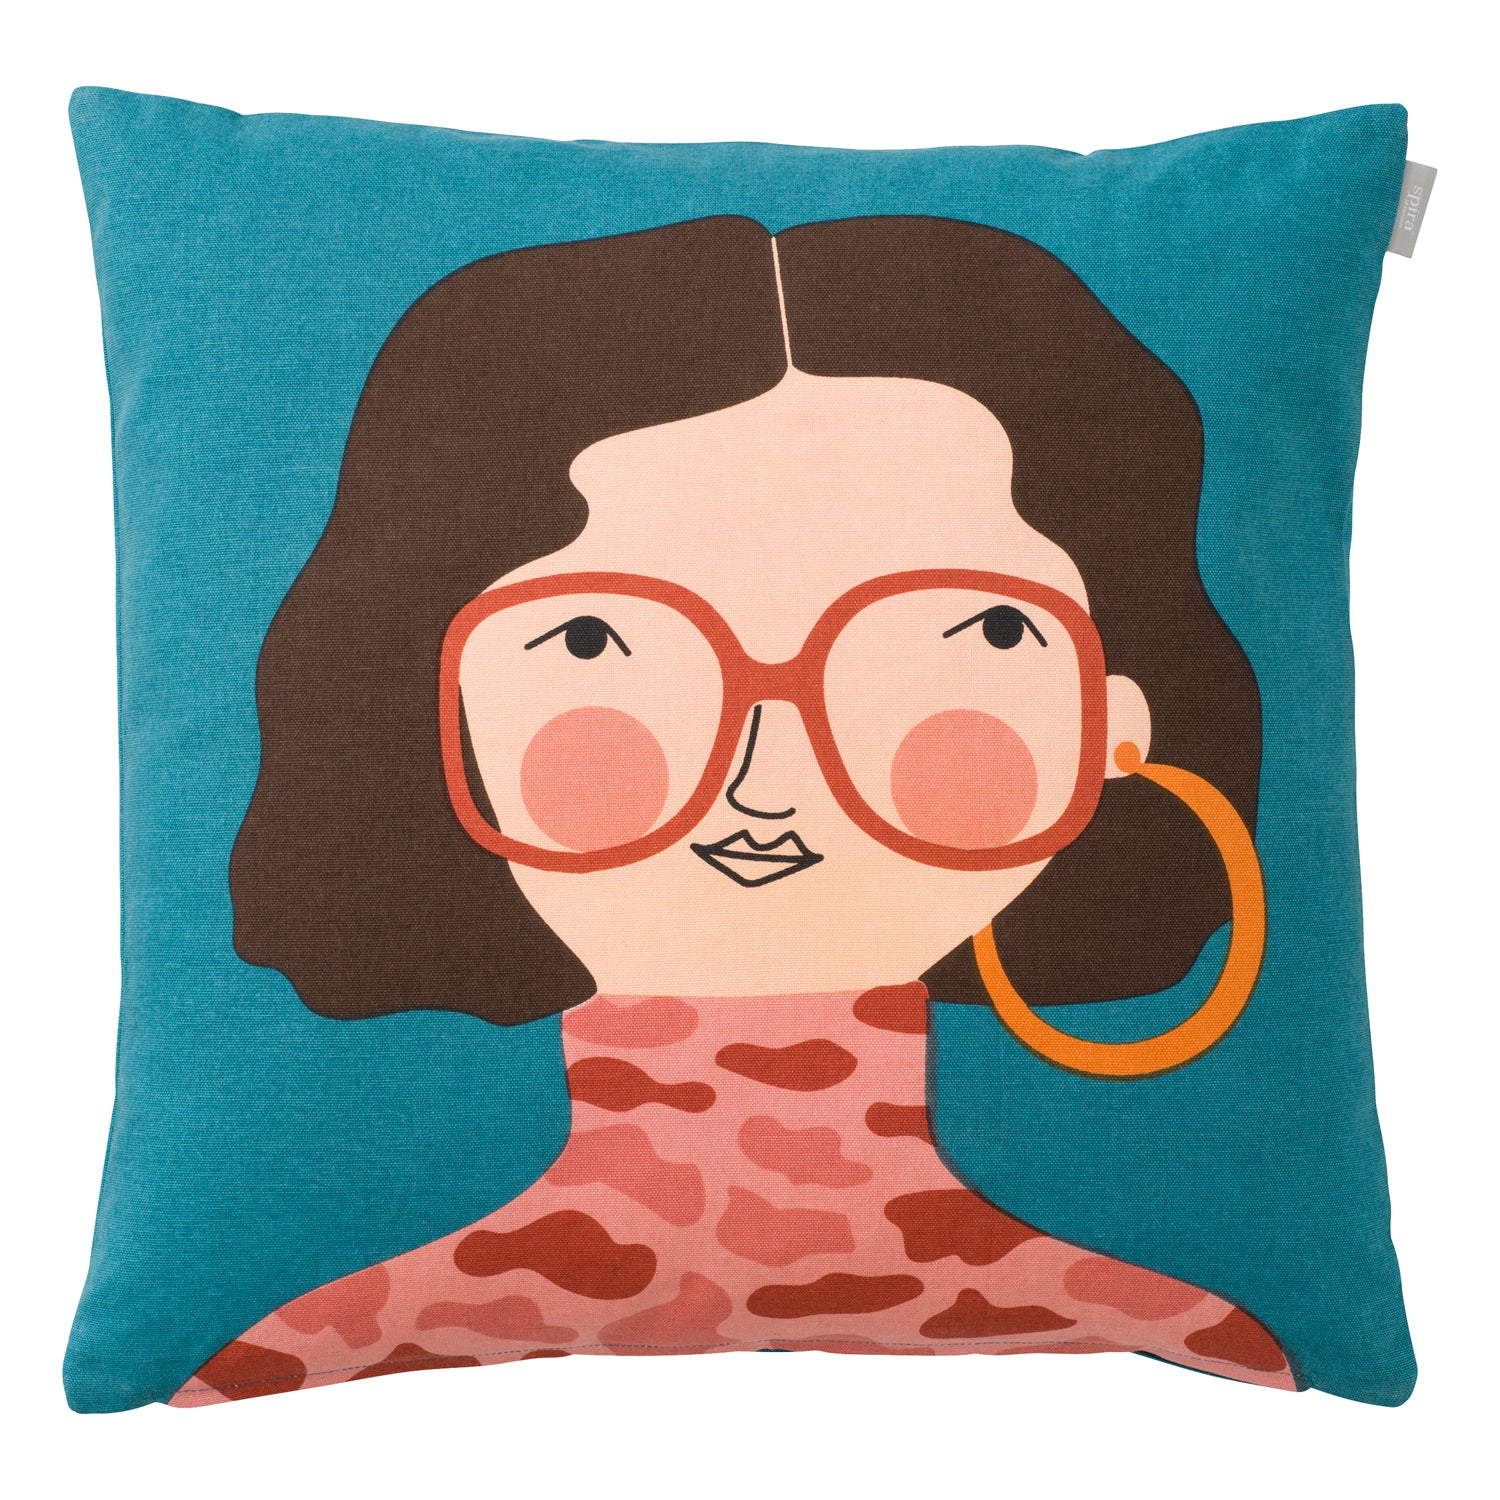 Teal colored cushion cover with women's face with brown hair and orange glasses.